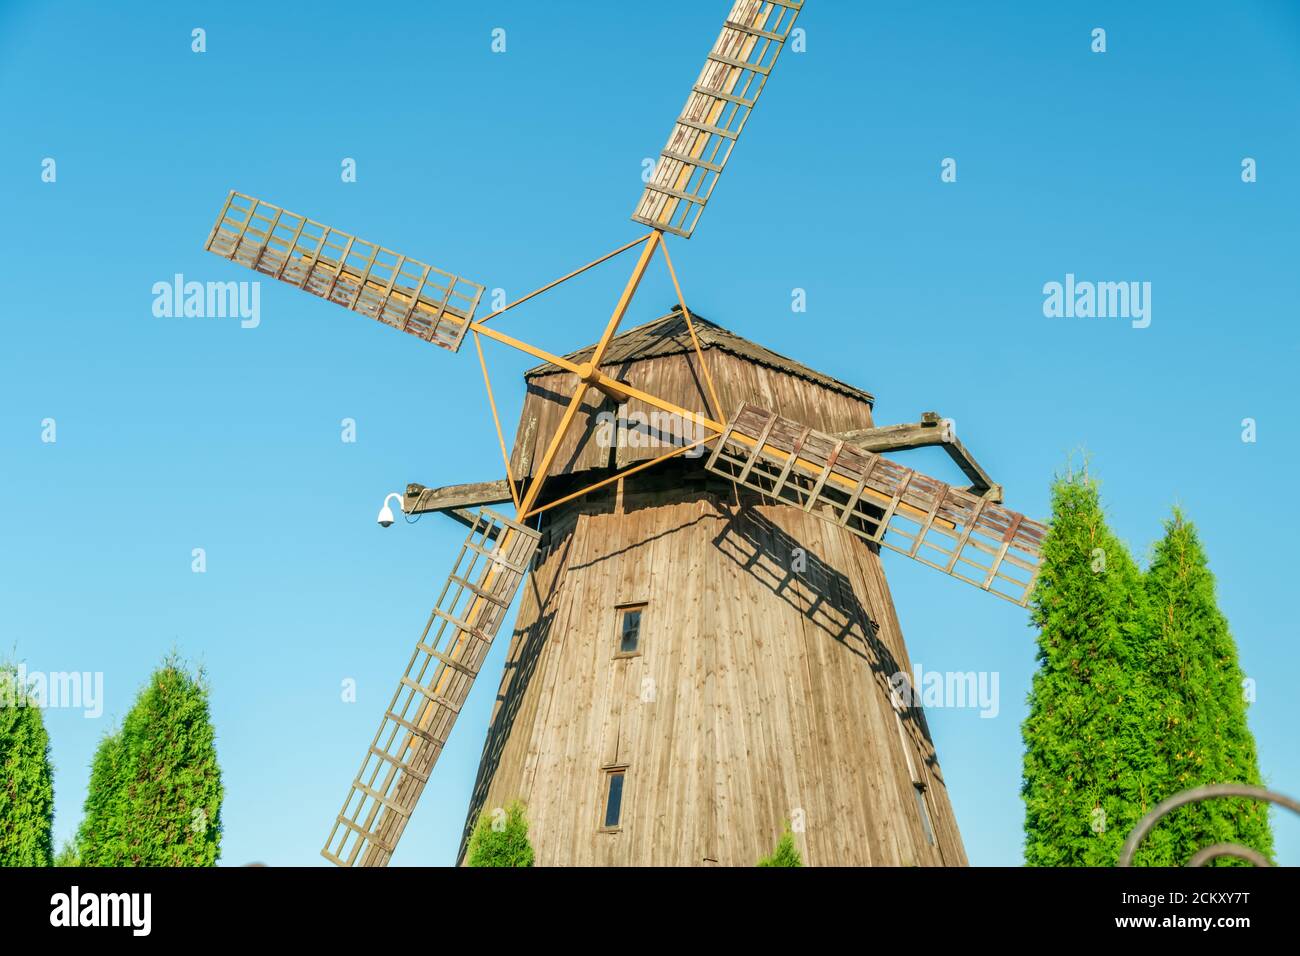 Windmill. Big wooden mill on blue sky background on Sunny summer day. Waste mill green arborvitae Stock Photo